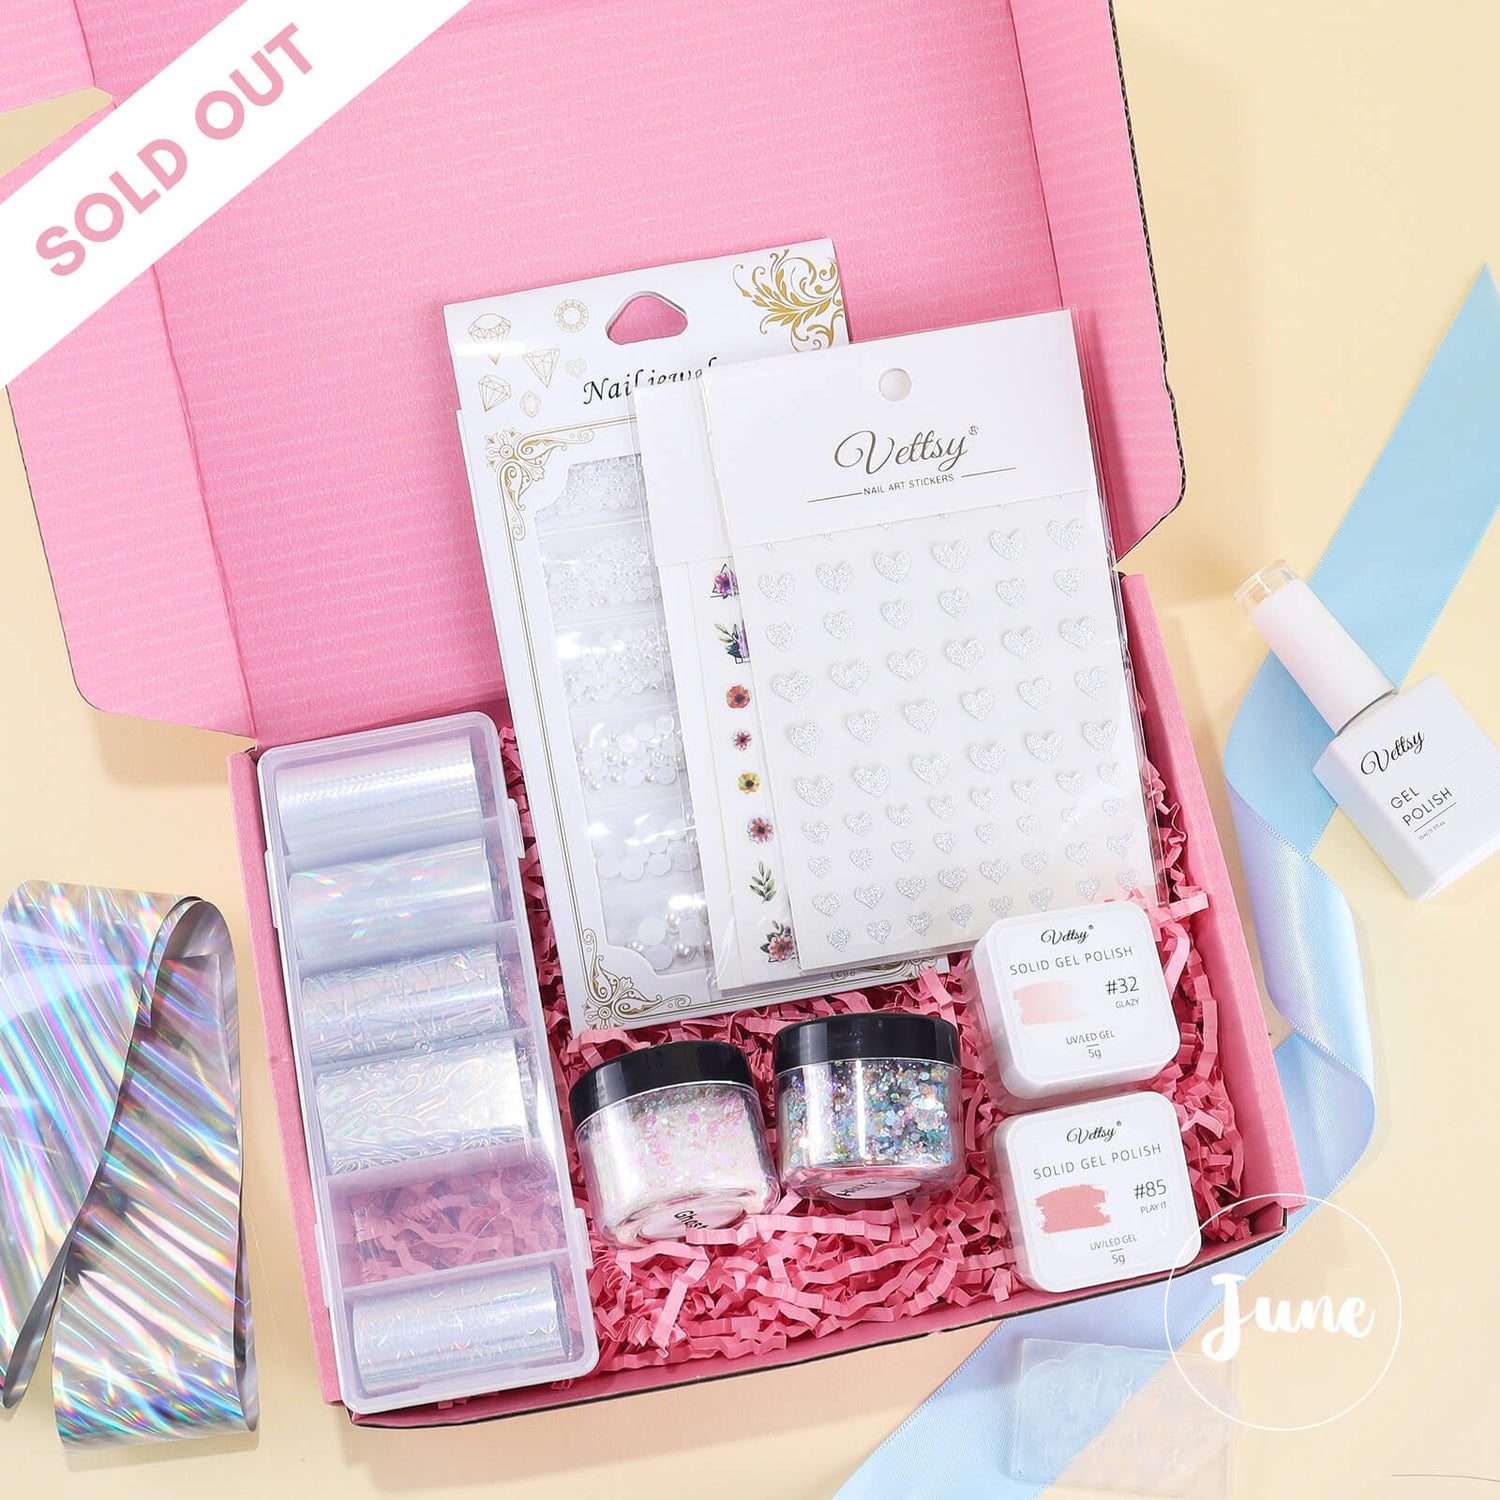 Monthly-subscrption-nail-art-box-June-mini-box-sold-out